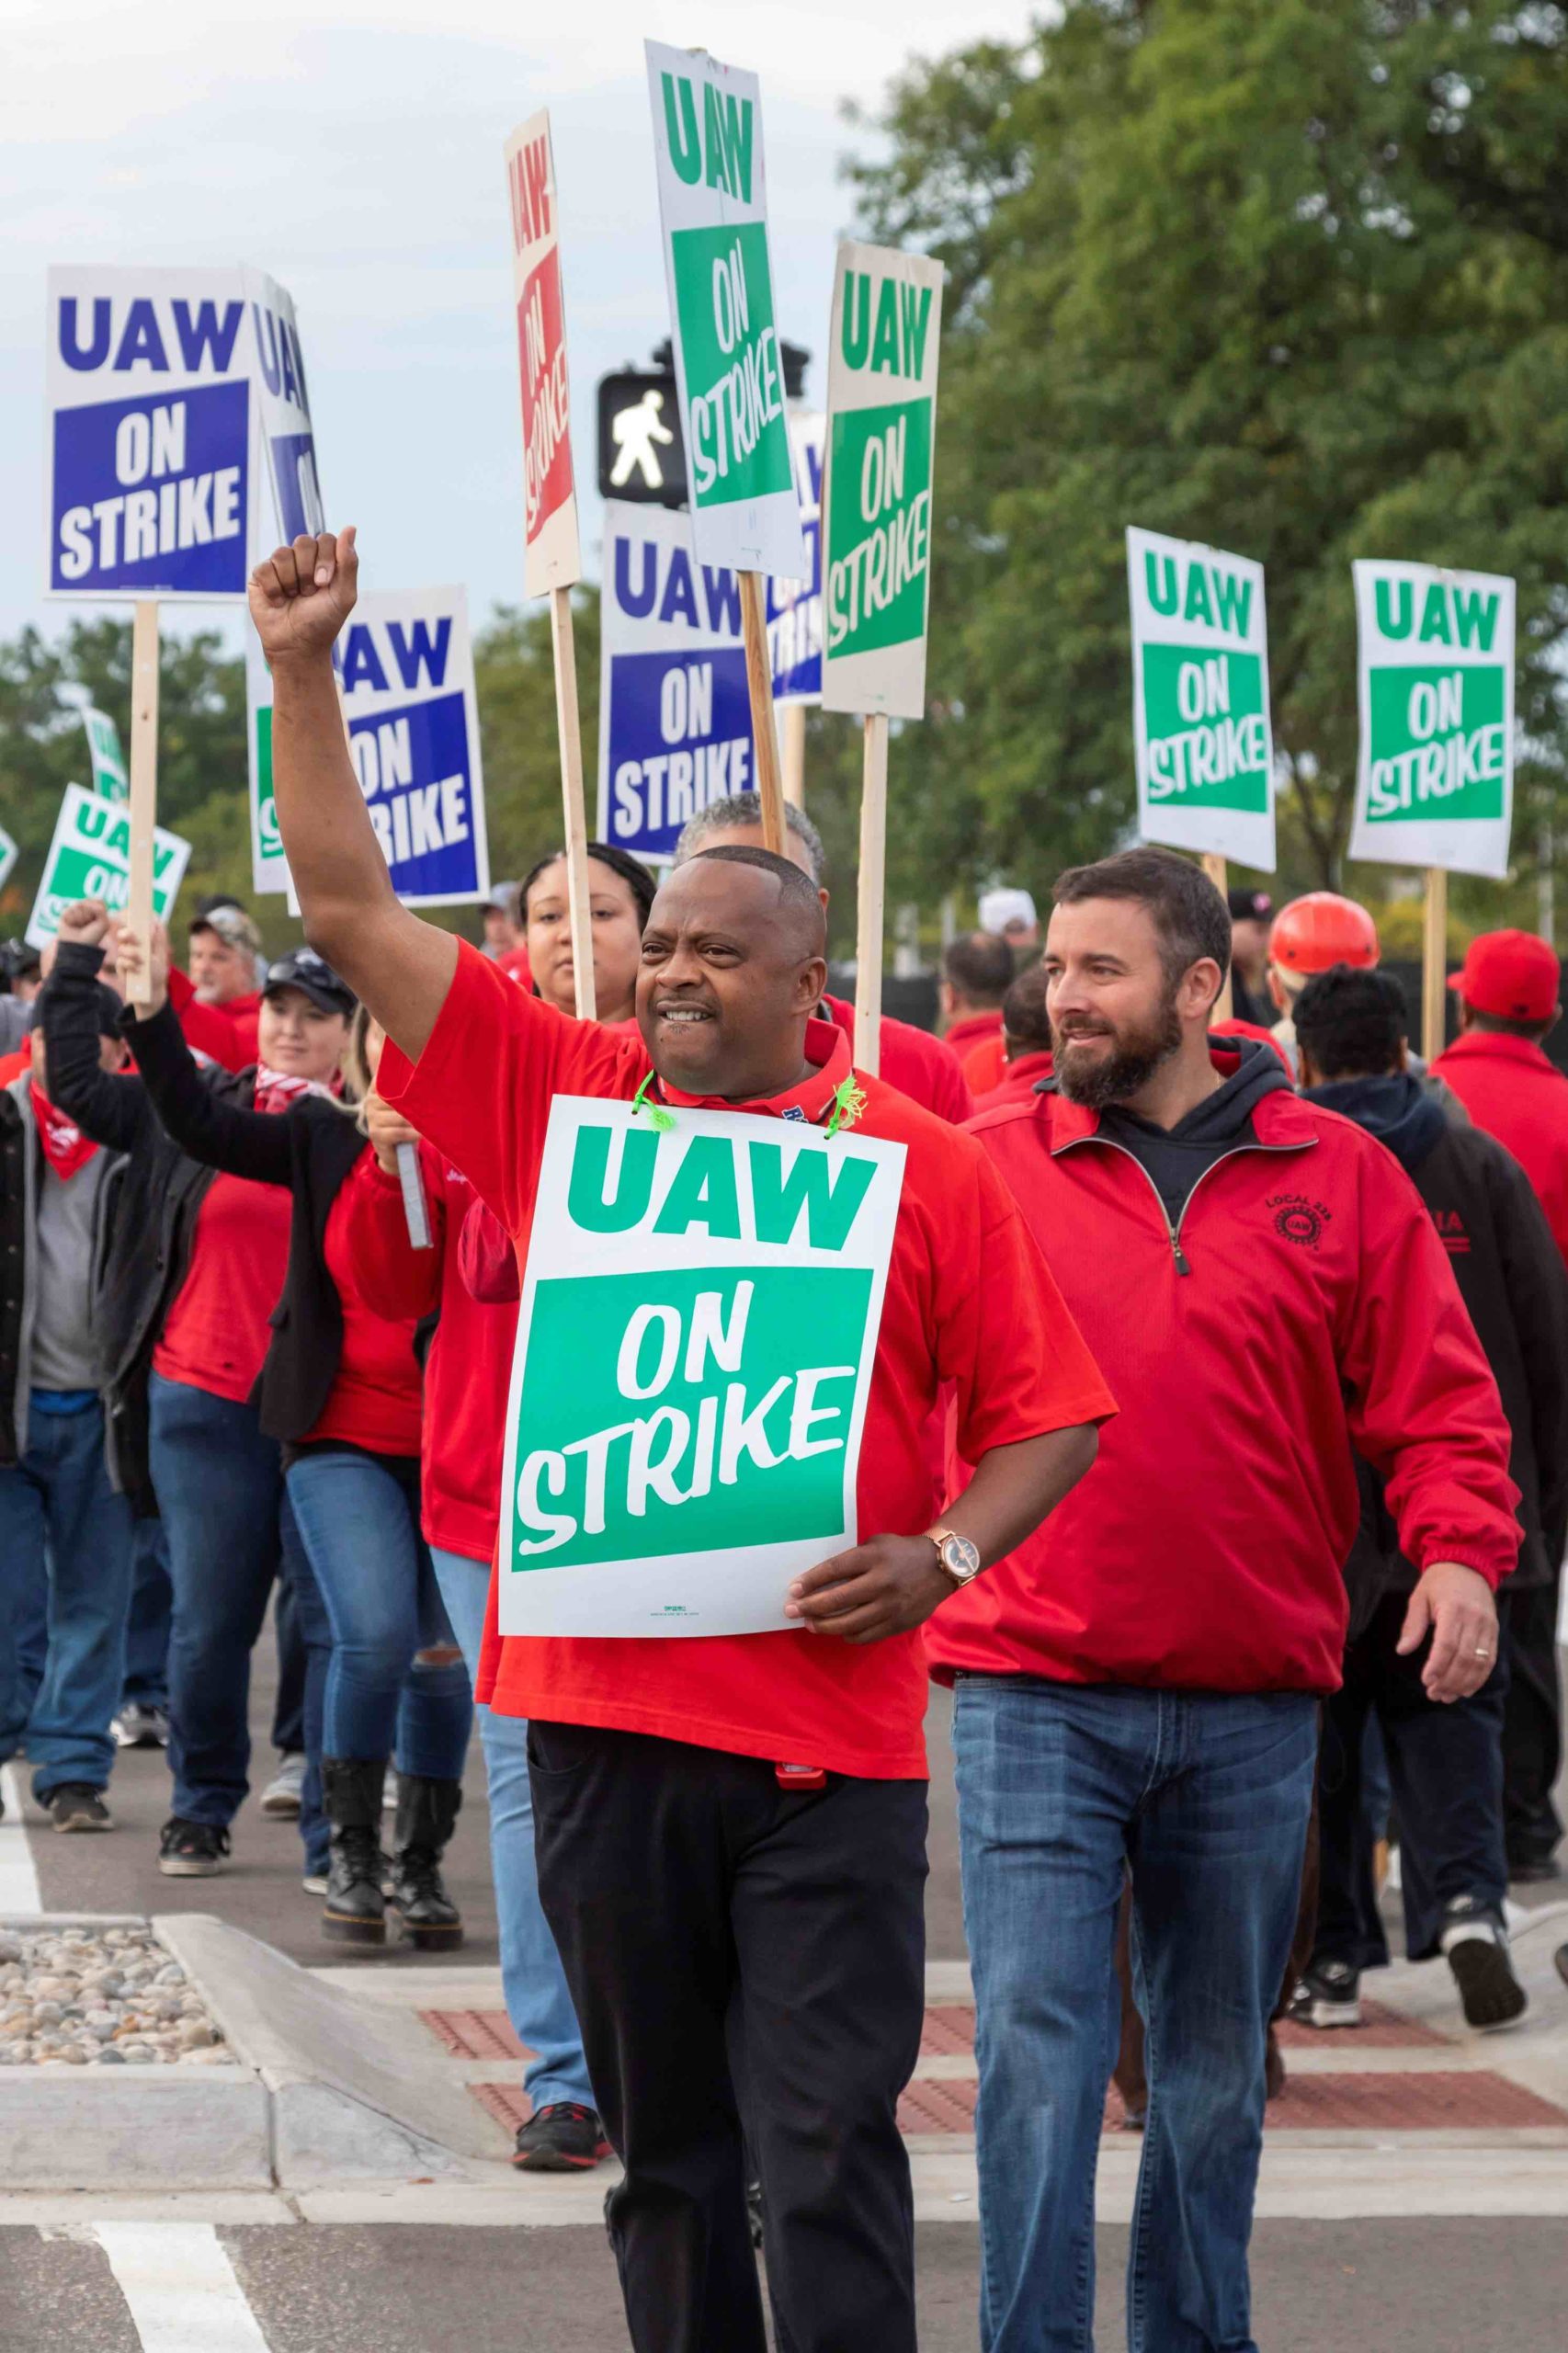 Beyond the 2019 UAW Negotiations